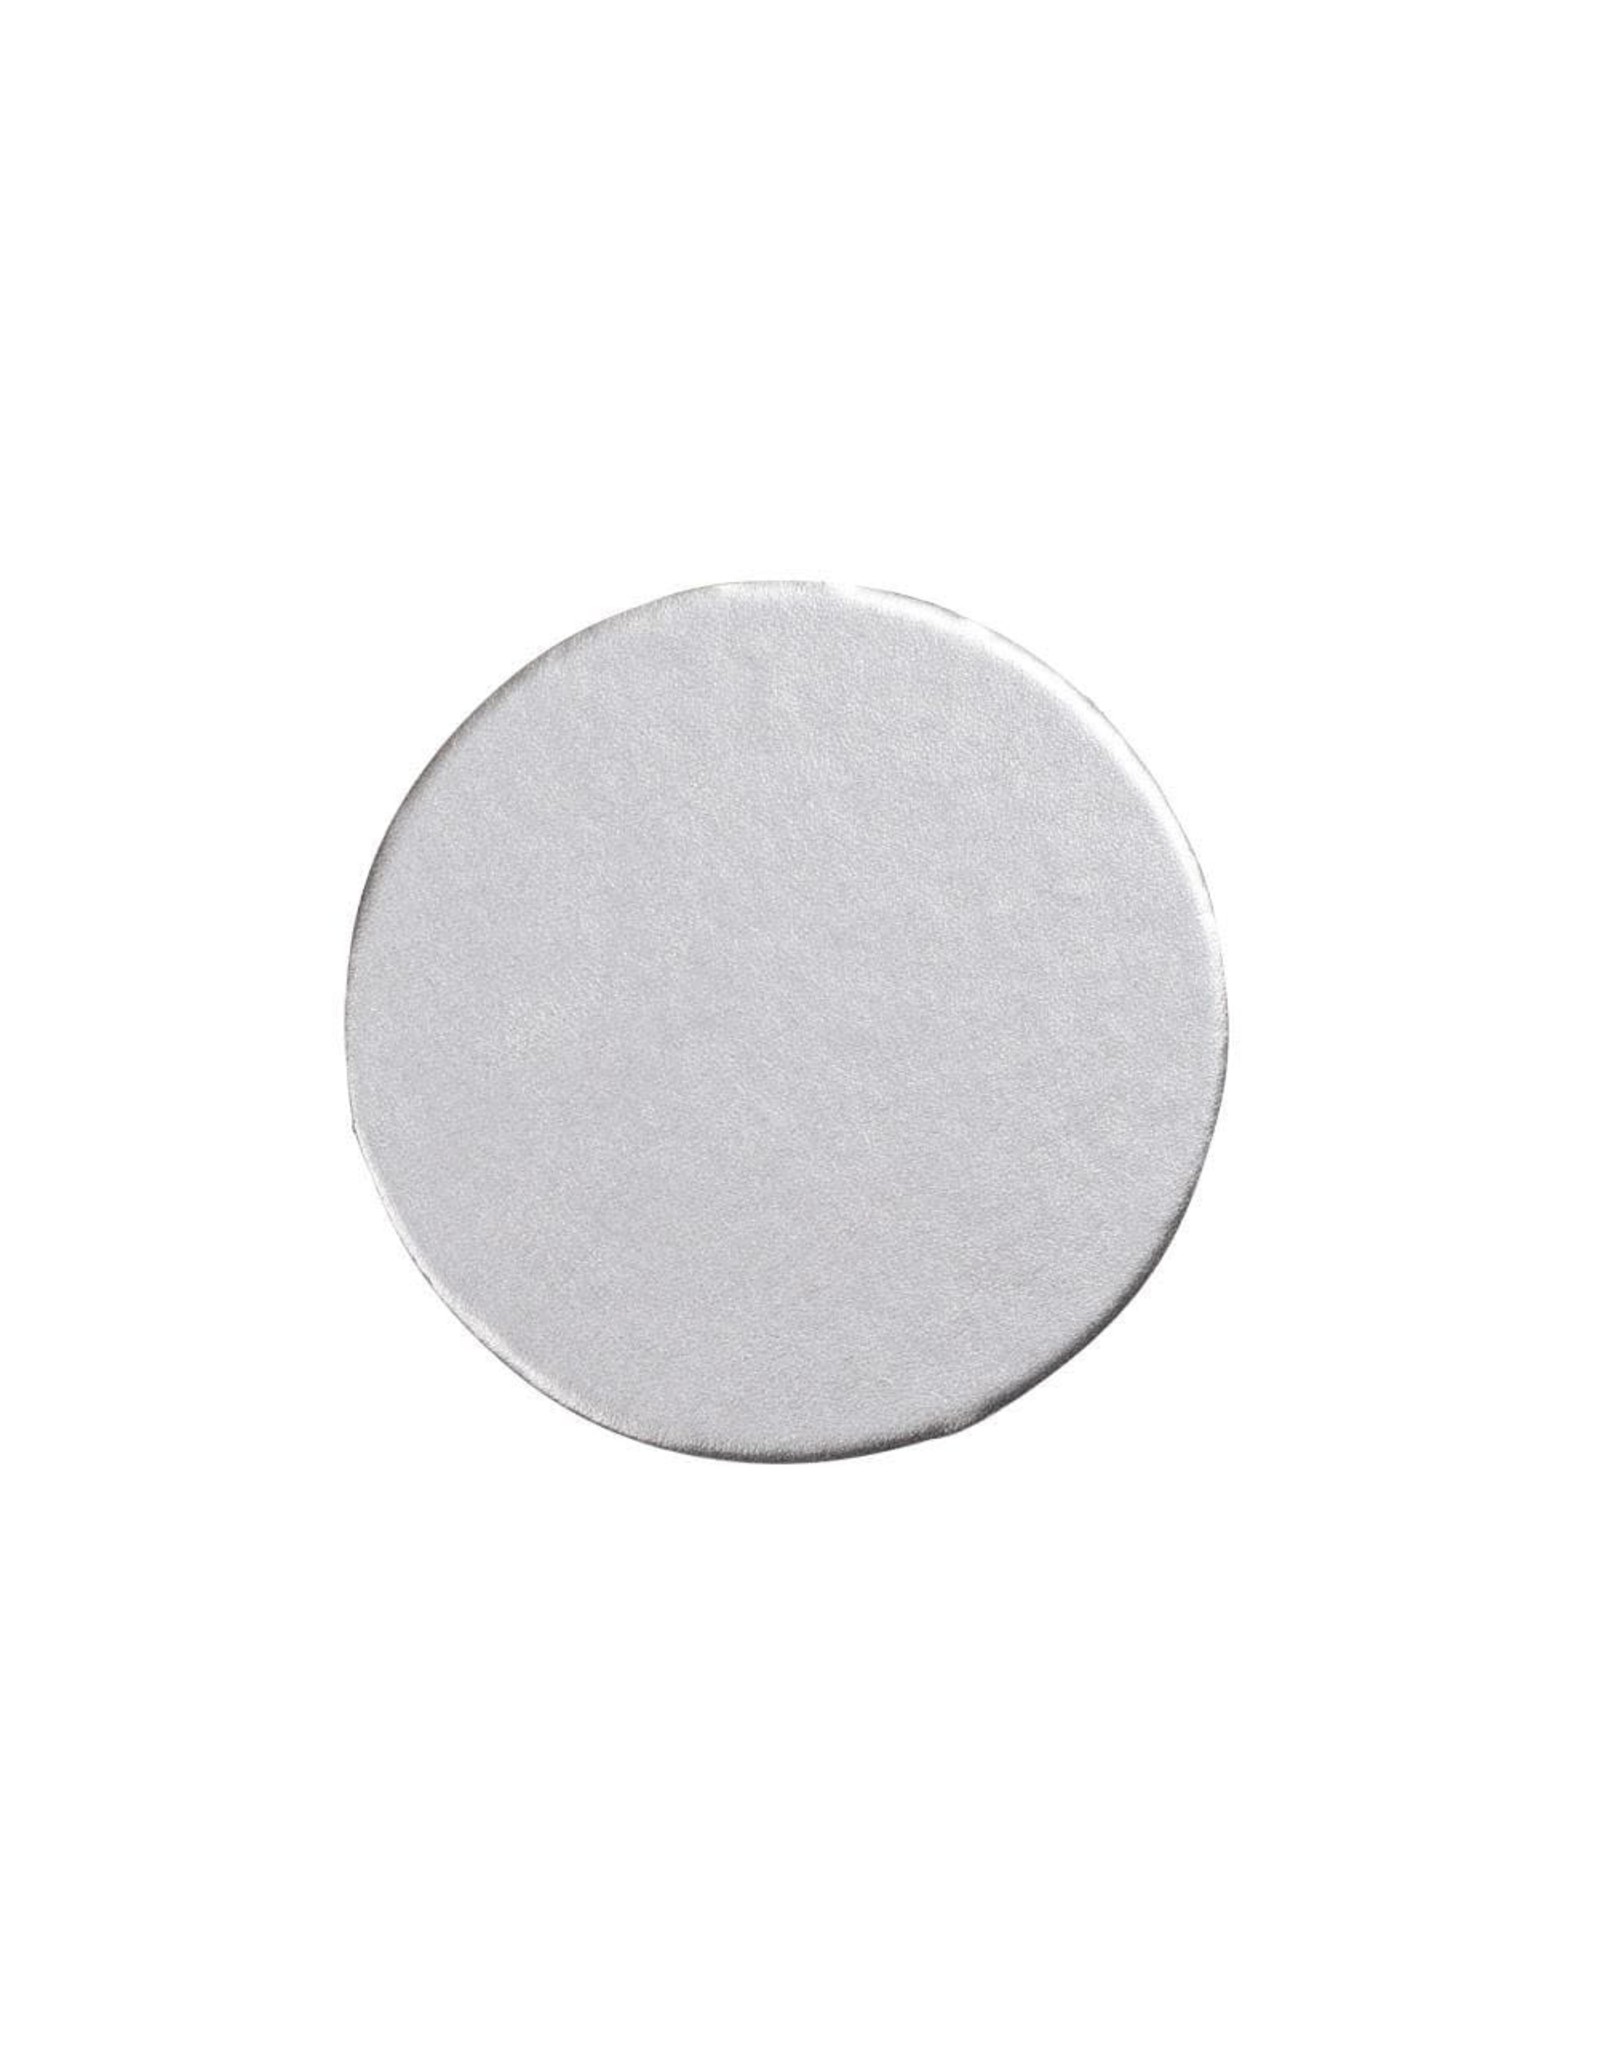 Caspari Round Luster Felt-Backed Coasters In Silver Set of 8